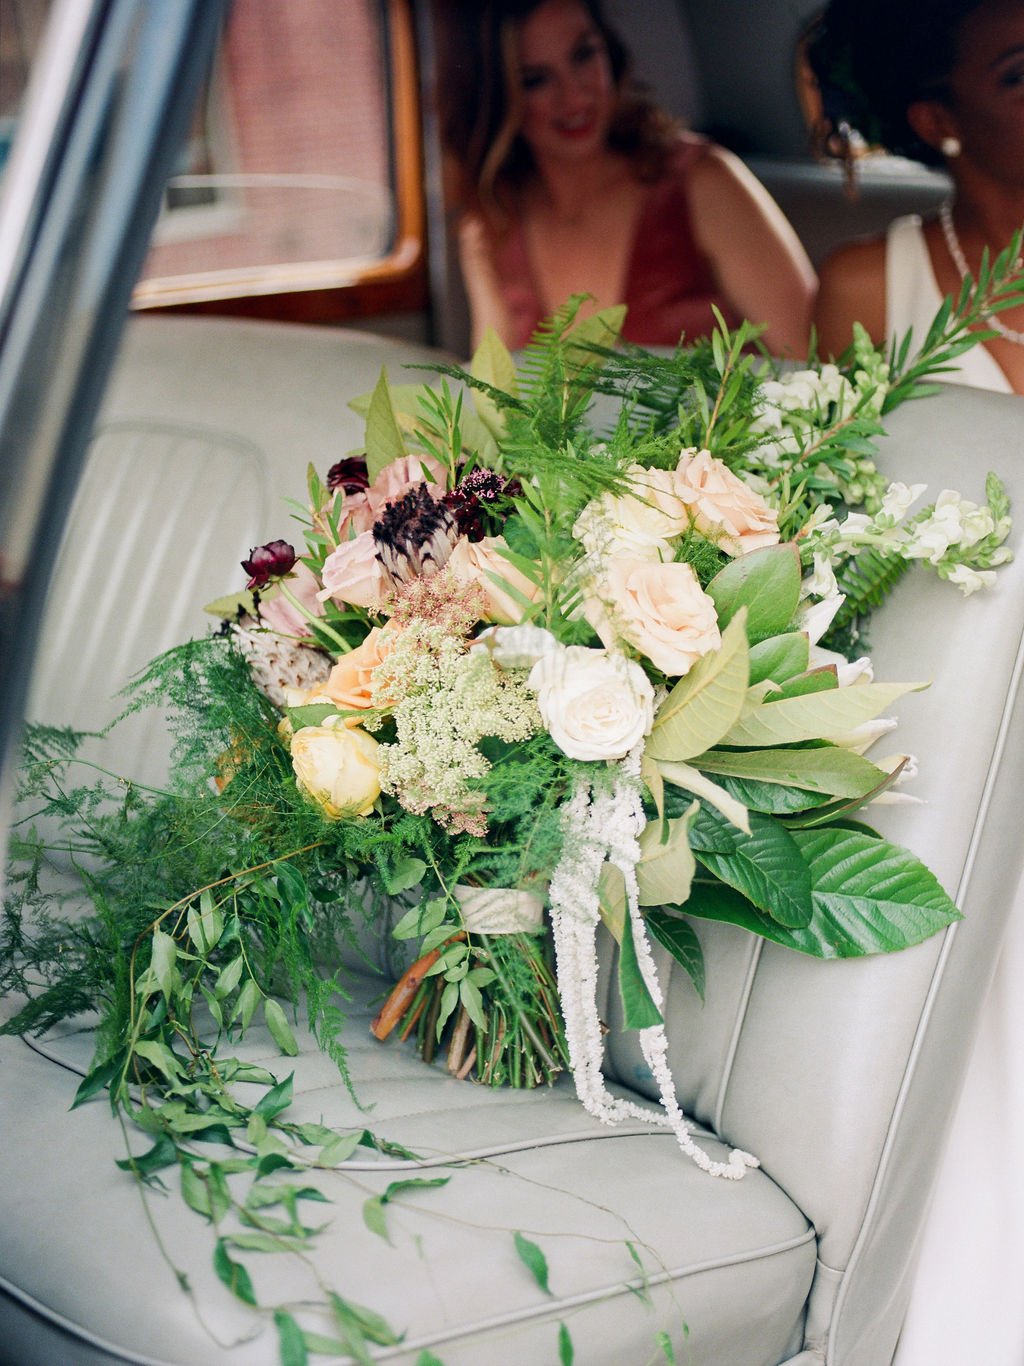 5-things-to-know-before-booking-your-wedding-florist-brought-to-you-by-savannah-wedding-planner-and-savannah-florist-ivory-and-beau-savannah-plant-riverside-district-savannah-wedding-savannah-bridal-shop-maggie-sottero-made-wiith-love-bridal-18.jpg